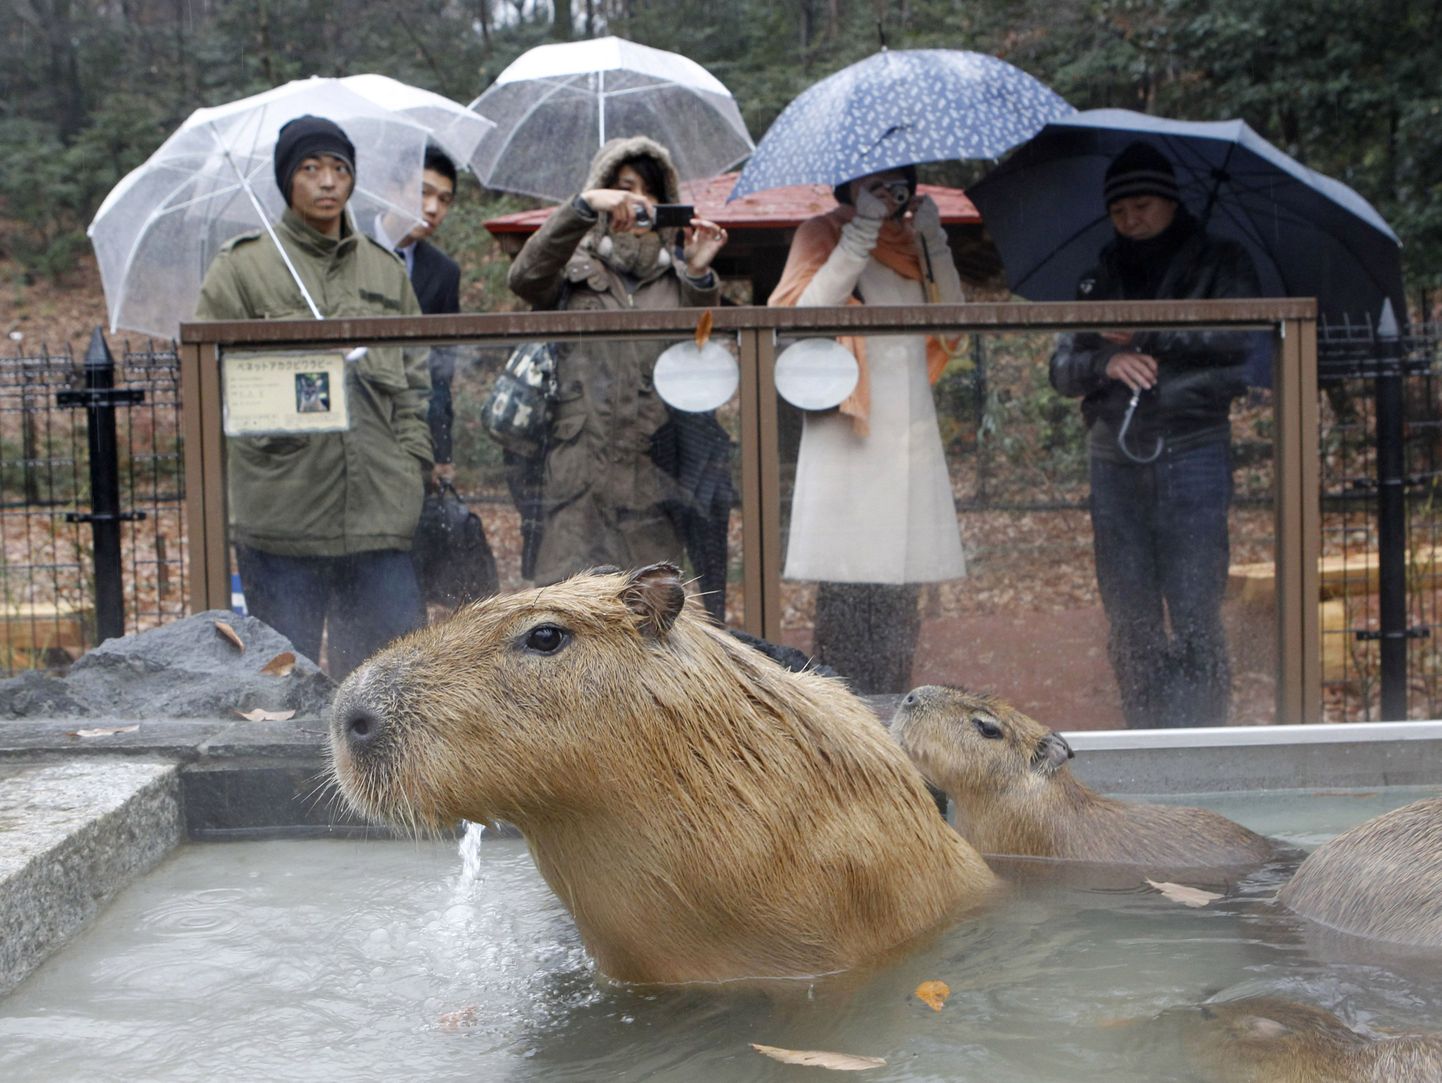 Capybaras sit inside a hot tub at the Saitama Children's Zoo in Higashimatsuyama, north of Tokyo December 11, 2009. The zoo offers the "hot spa" to its family of capybara, the largest living rodent in the world, in the winter season to entertain zoo visitors.    REUTERS/Kim Kyung-Hoon (JAPAN ANIMALS)